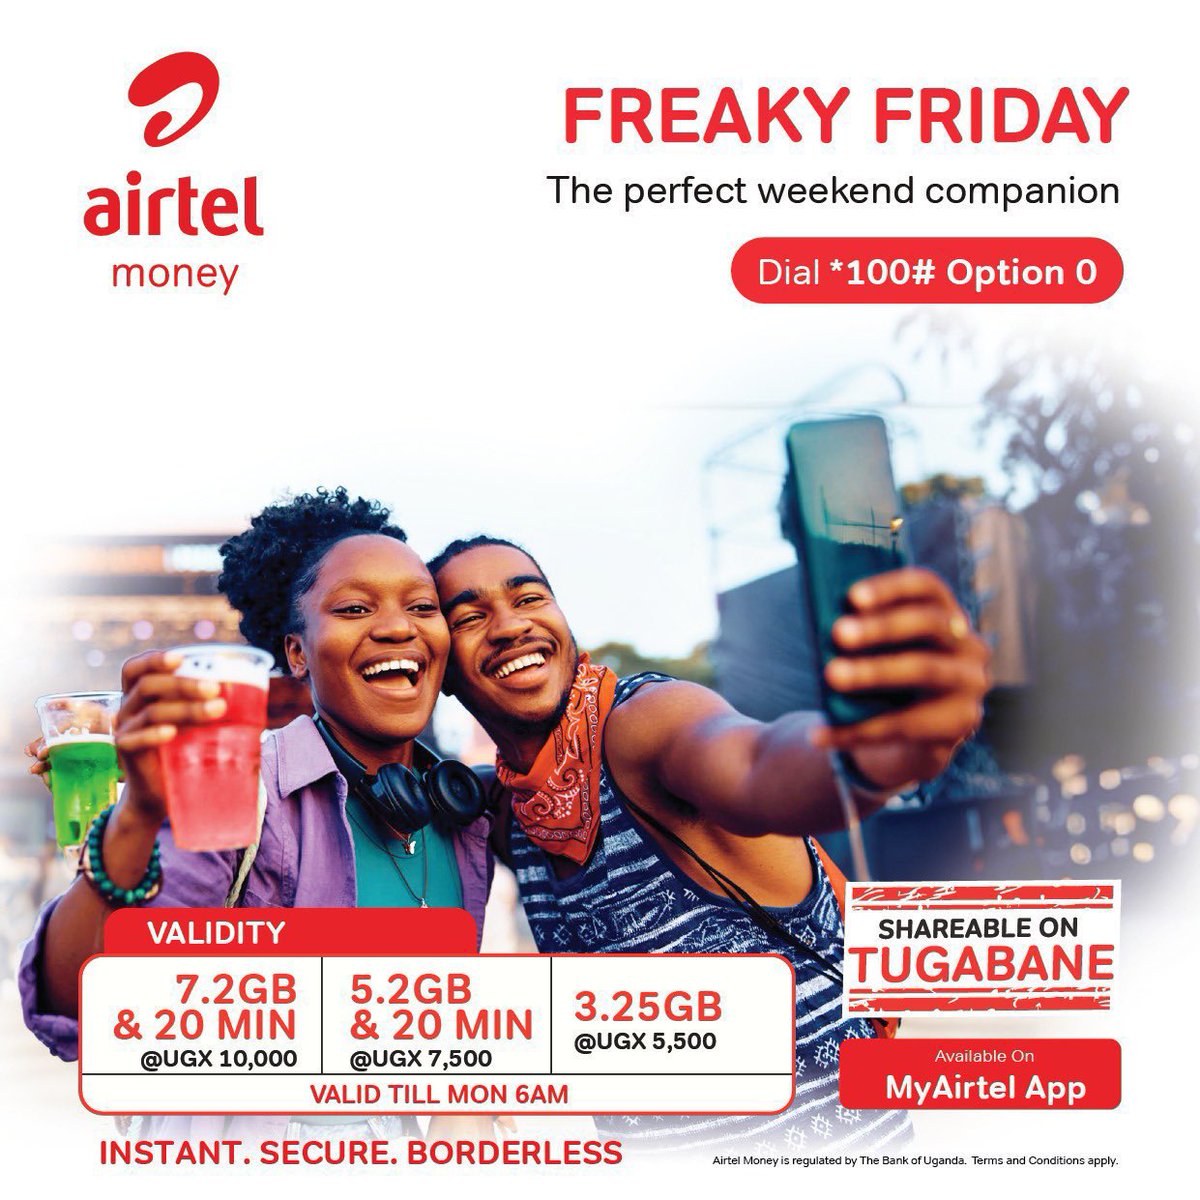 Enjoy your weekend in style by dialing *100*0# now to subscribe for #FreakyFriday bundle valid till Monday 6Am Follow us @Airtel_Ug to keep updated on what we have for you in stock.